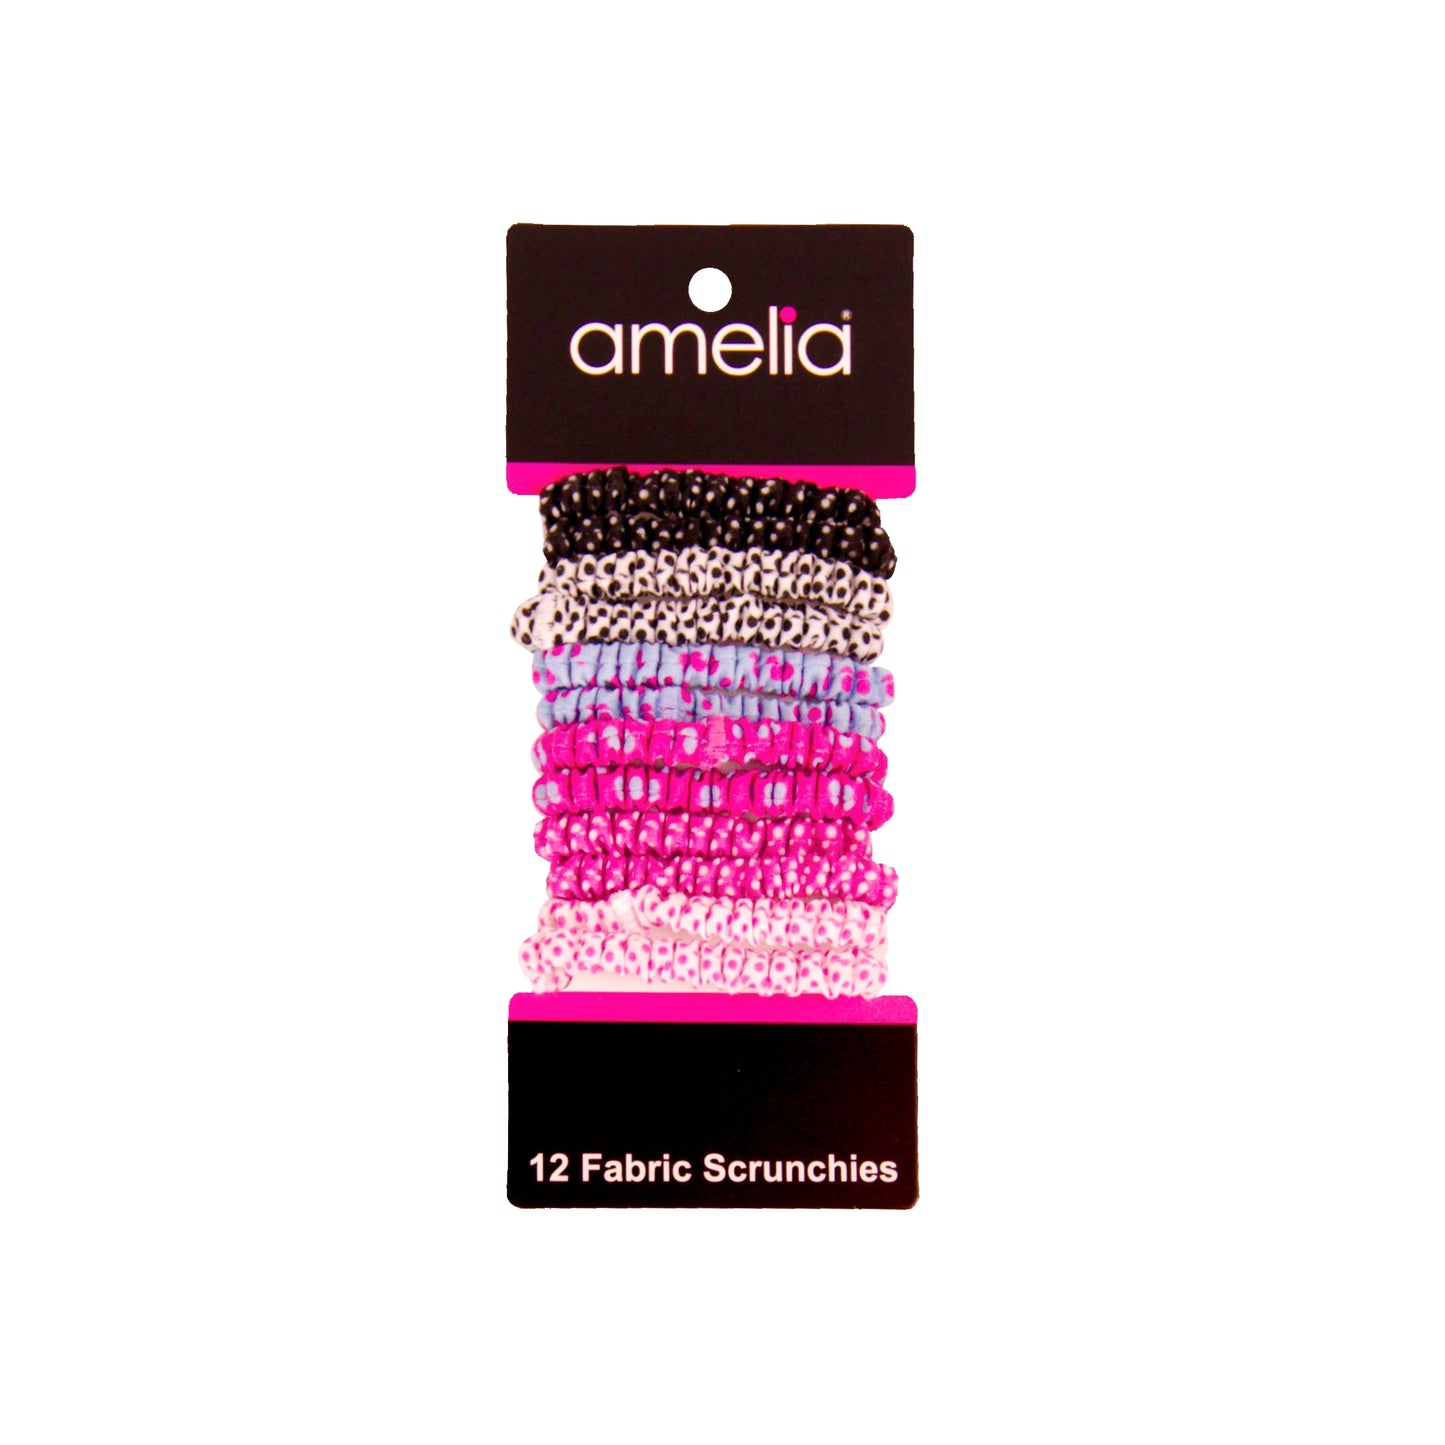 Amelia Beauty, Polka Dot Mix Skinny Jersey Scrunchies, 2.125in Diameter, Gentle on Hair, Strong Hold, No Snag, No Dents or Creases. 12 Pack